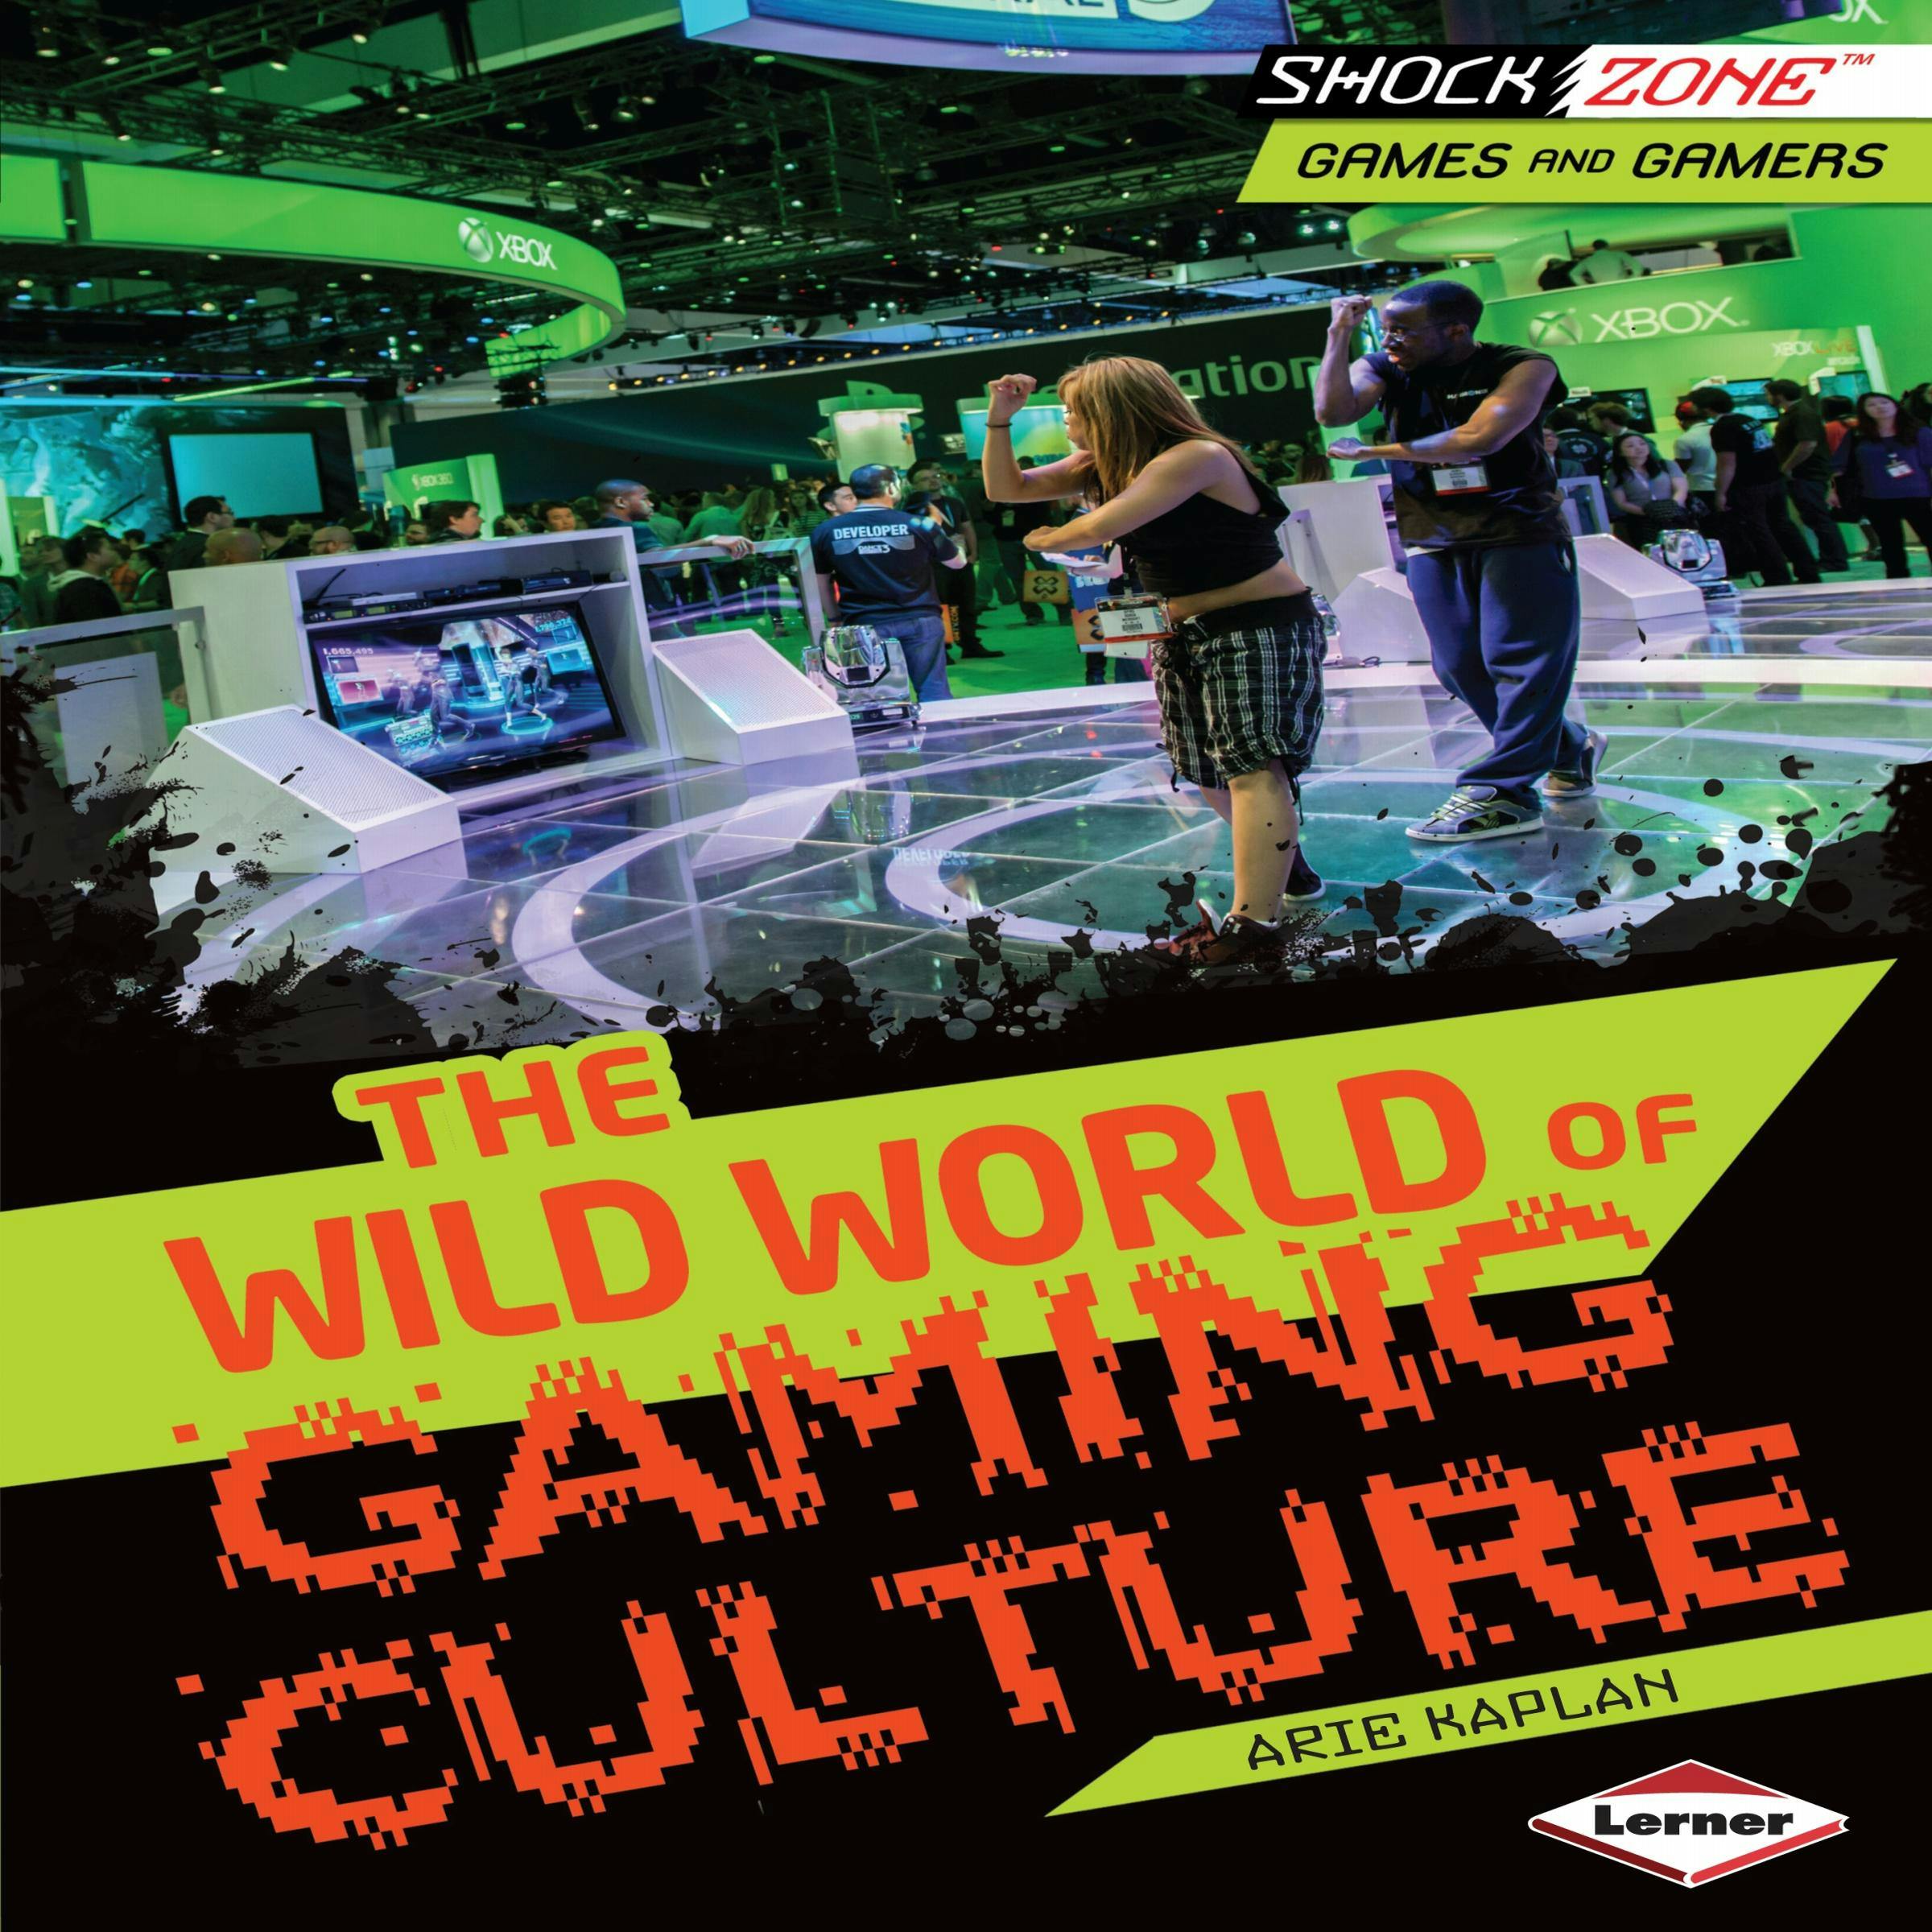 The Wild World of Gaming Culture - undefined